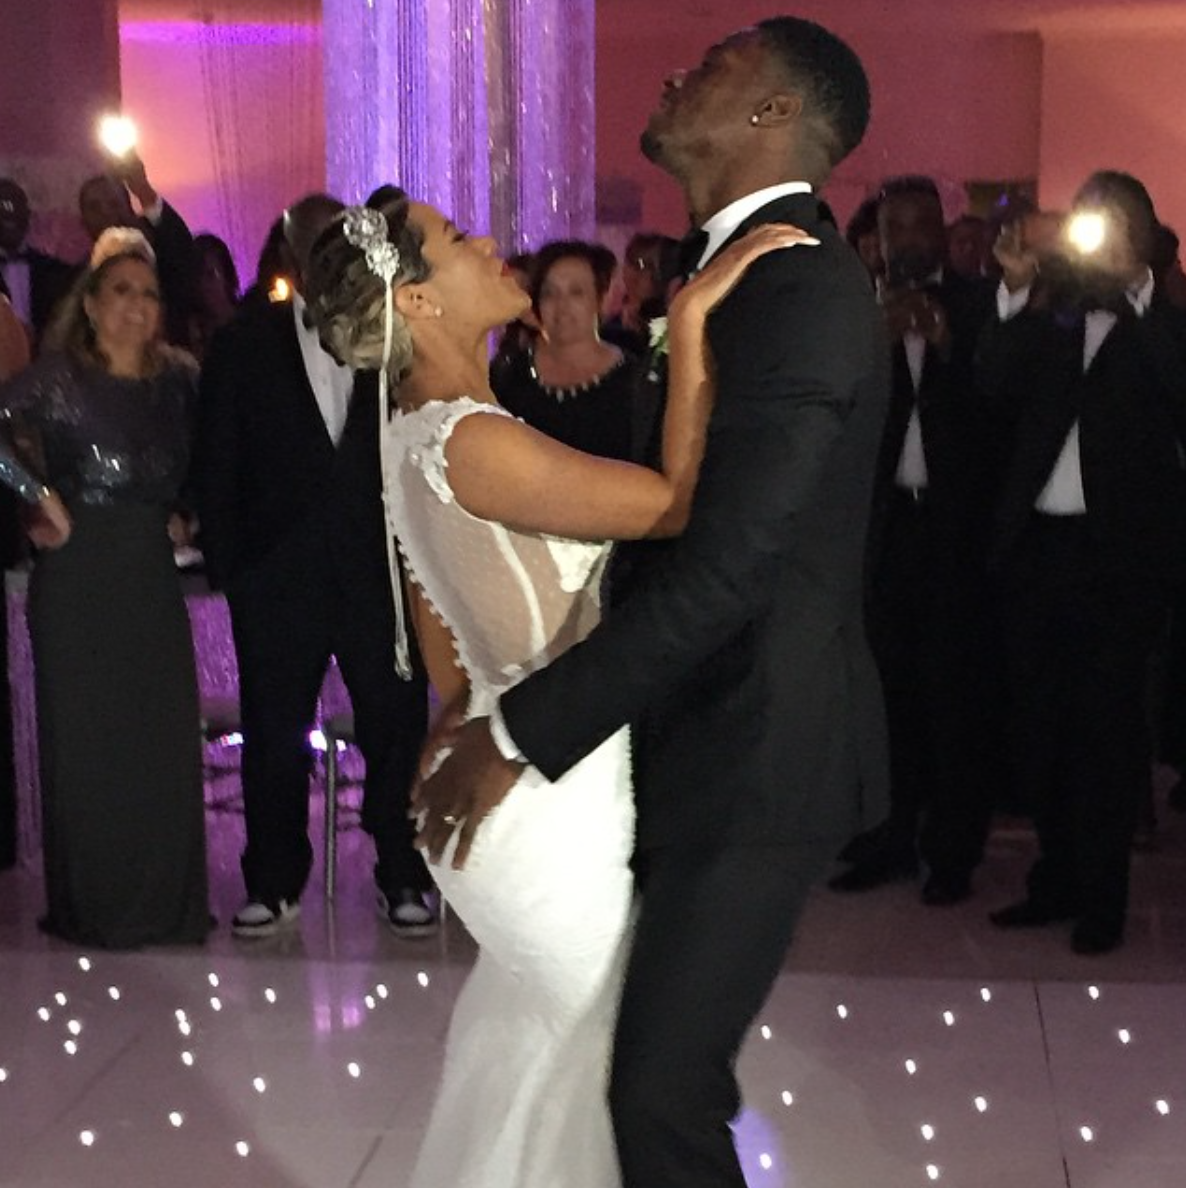 14 Cute Photos of NFL Star AJ Green And His Wife
